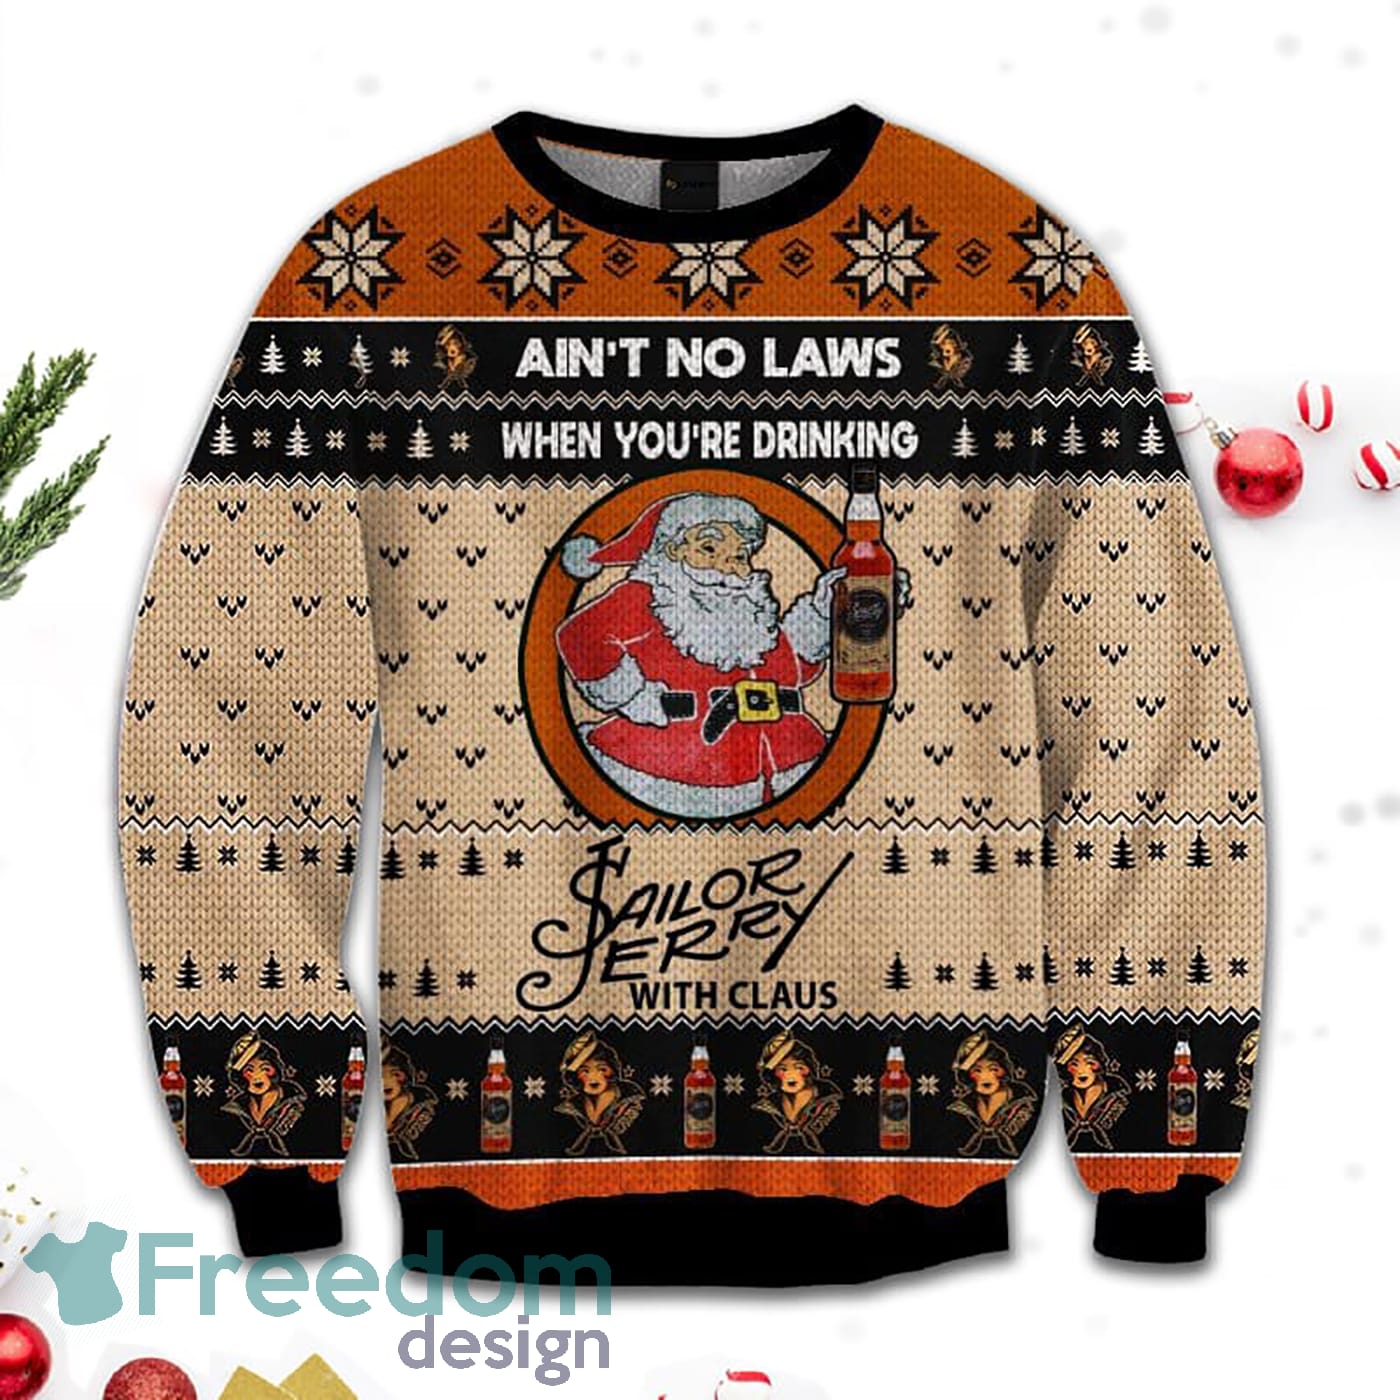 Merr Christmas Ain't No Laws When You're Drink Sailor Jerry With Claus Sweatshirt